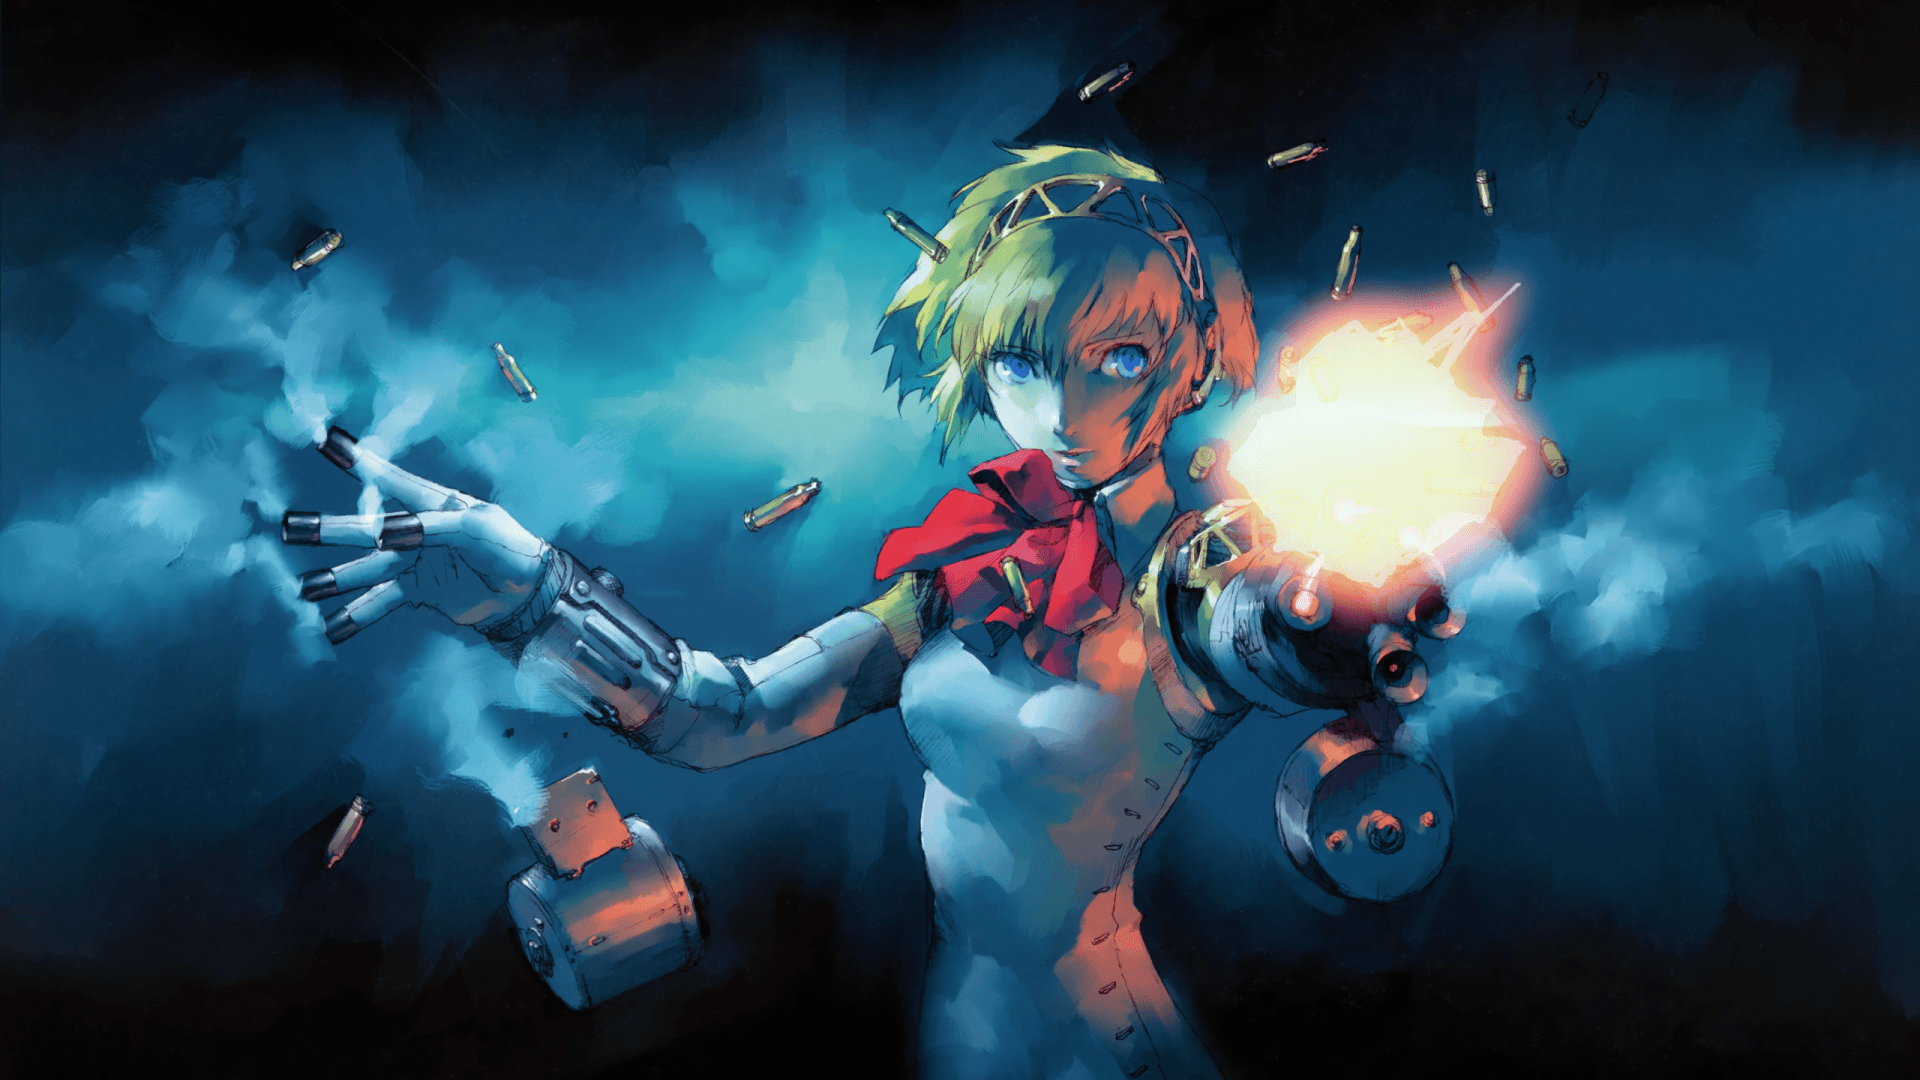 1920x1080 Free download Anime Drawing games weapons sci fi futuristic girl art wallpaper [2560x1600] for your Desktop, Mobile & Tablet. Explore Anime Sci Fi Wallpaper. Sci Fi City Wallpaper, 3D on WallpaperBat